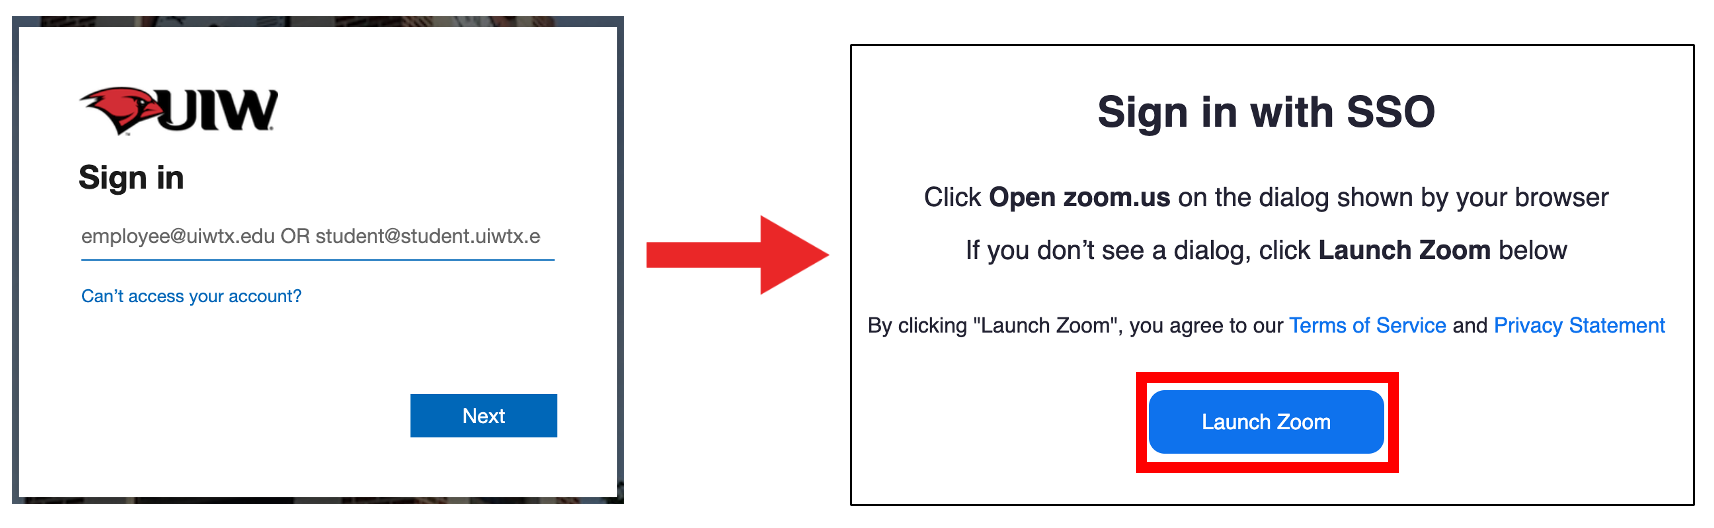 Cardinal Apps login page to Launch zoom pop up